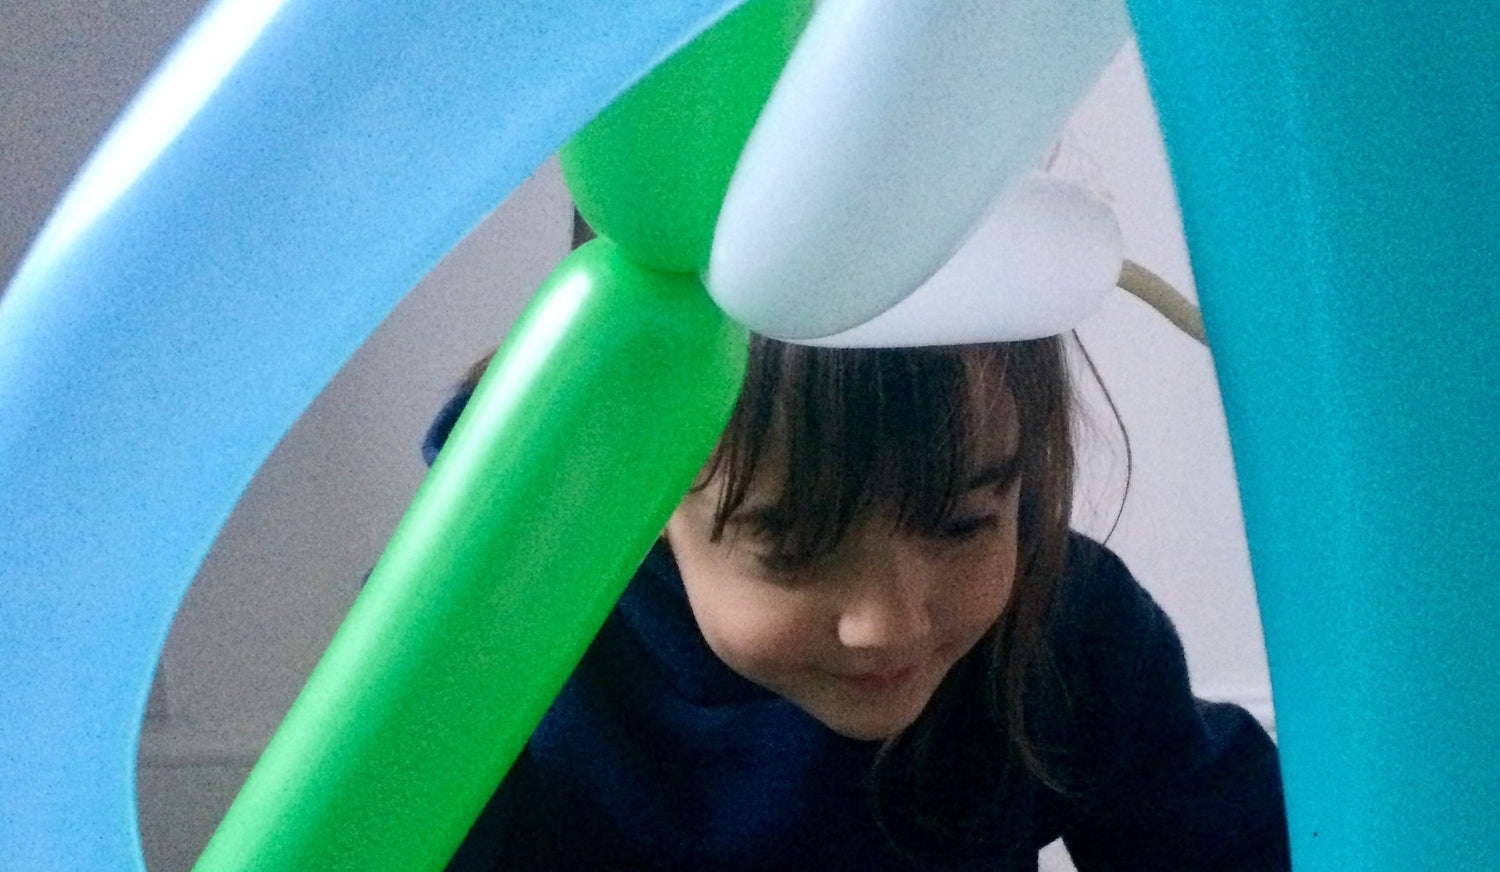 Collaborative Sculpture - Balloon Modelling with Let’s Make Art - FREE with exhibition entry